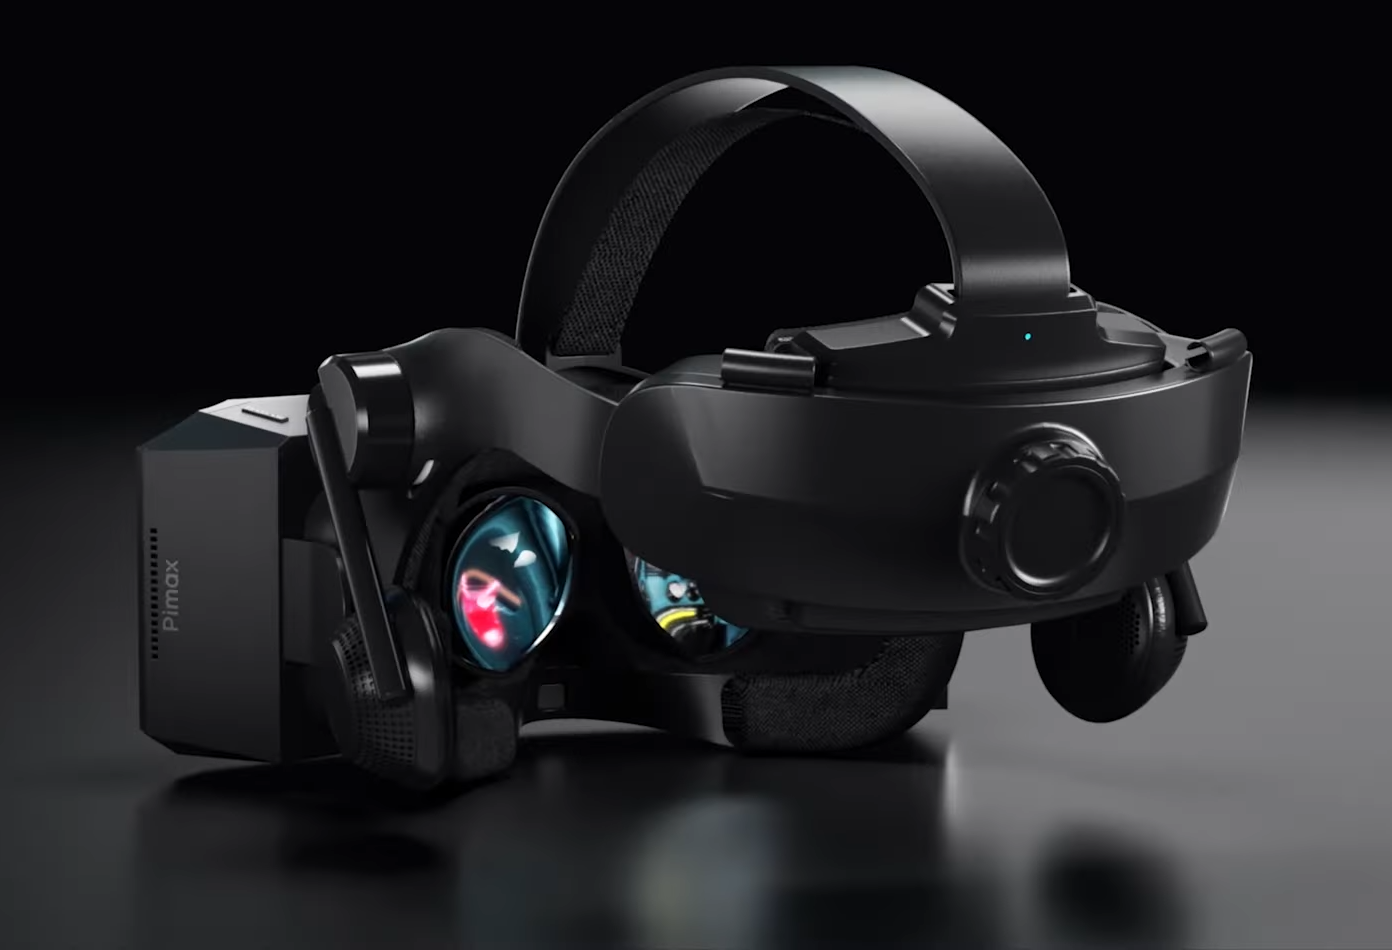 Pimax Crystal price reduced to $1599, Pimax users $1499 ,no release date so  far. : r/virtualreality